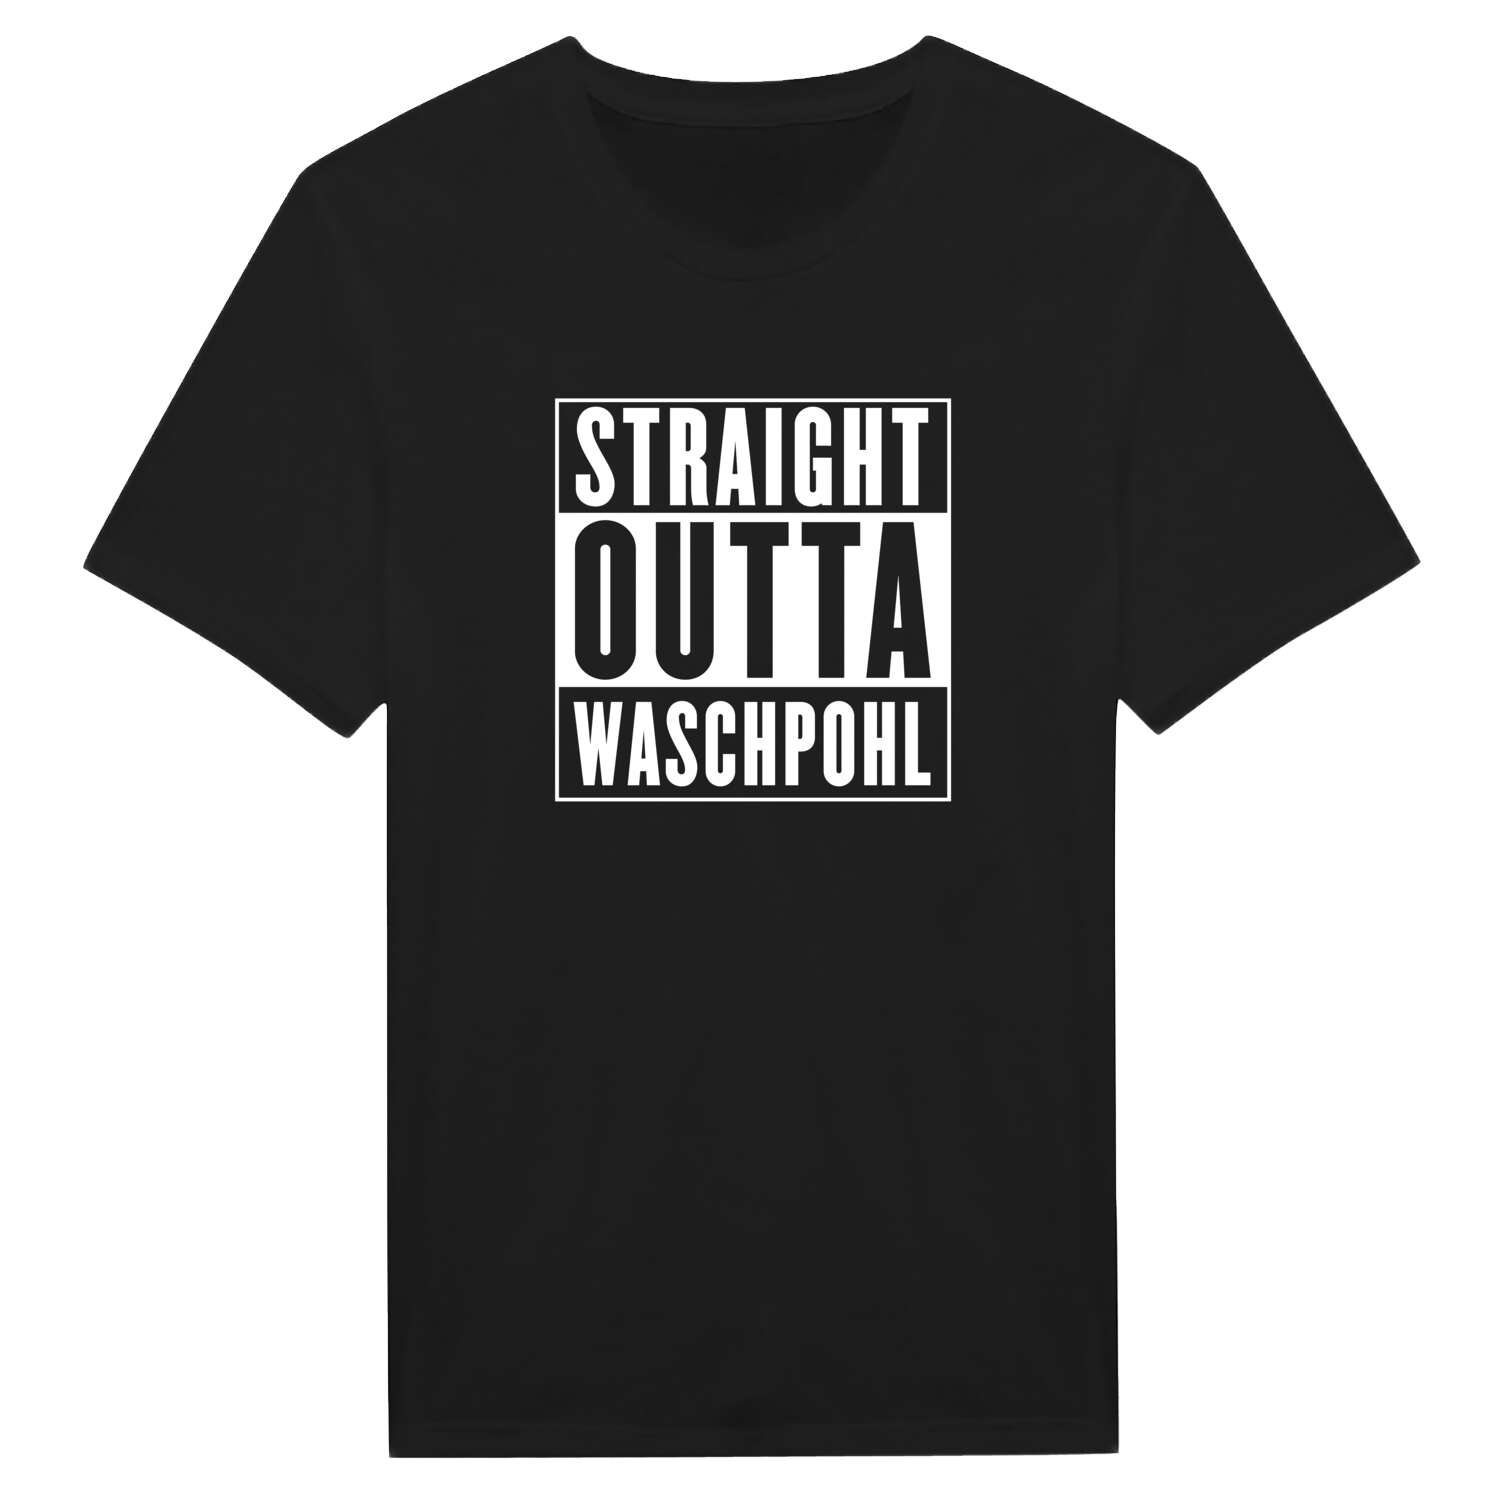 Waschpohl T-Shirt »Straight Outta«